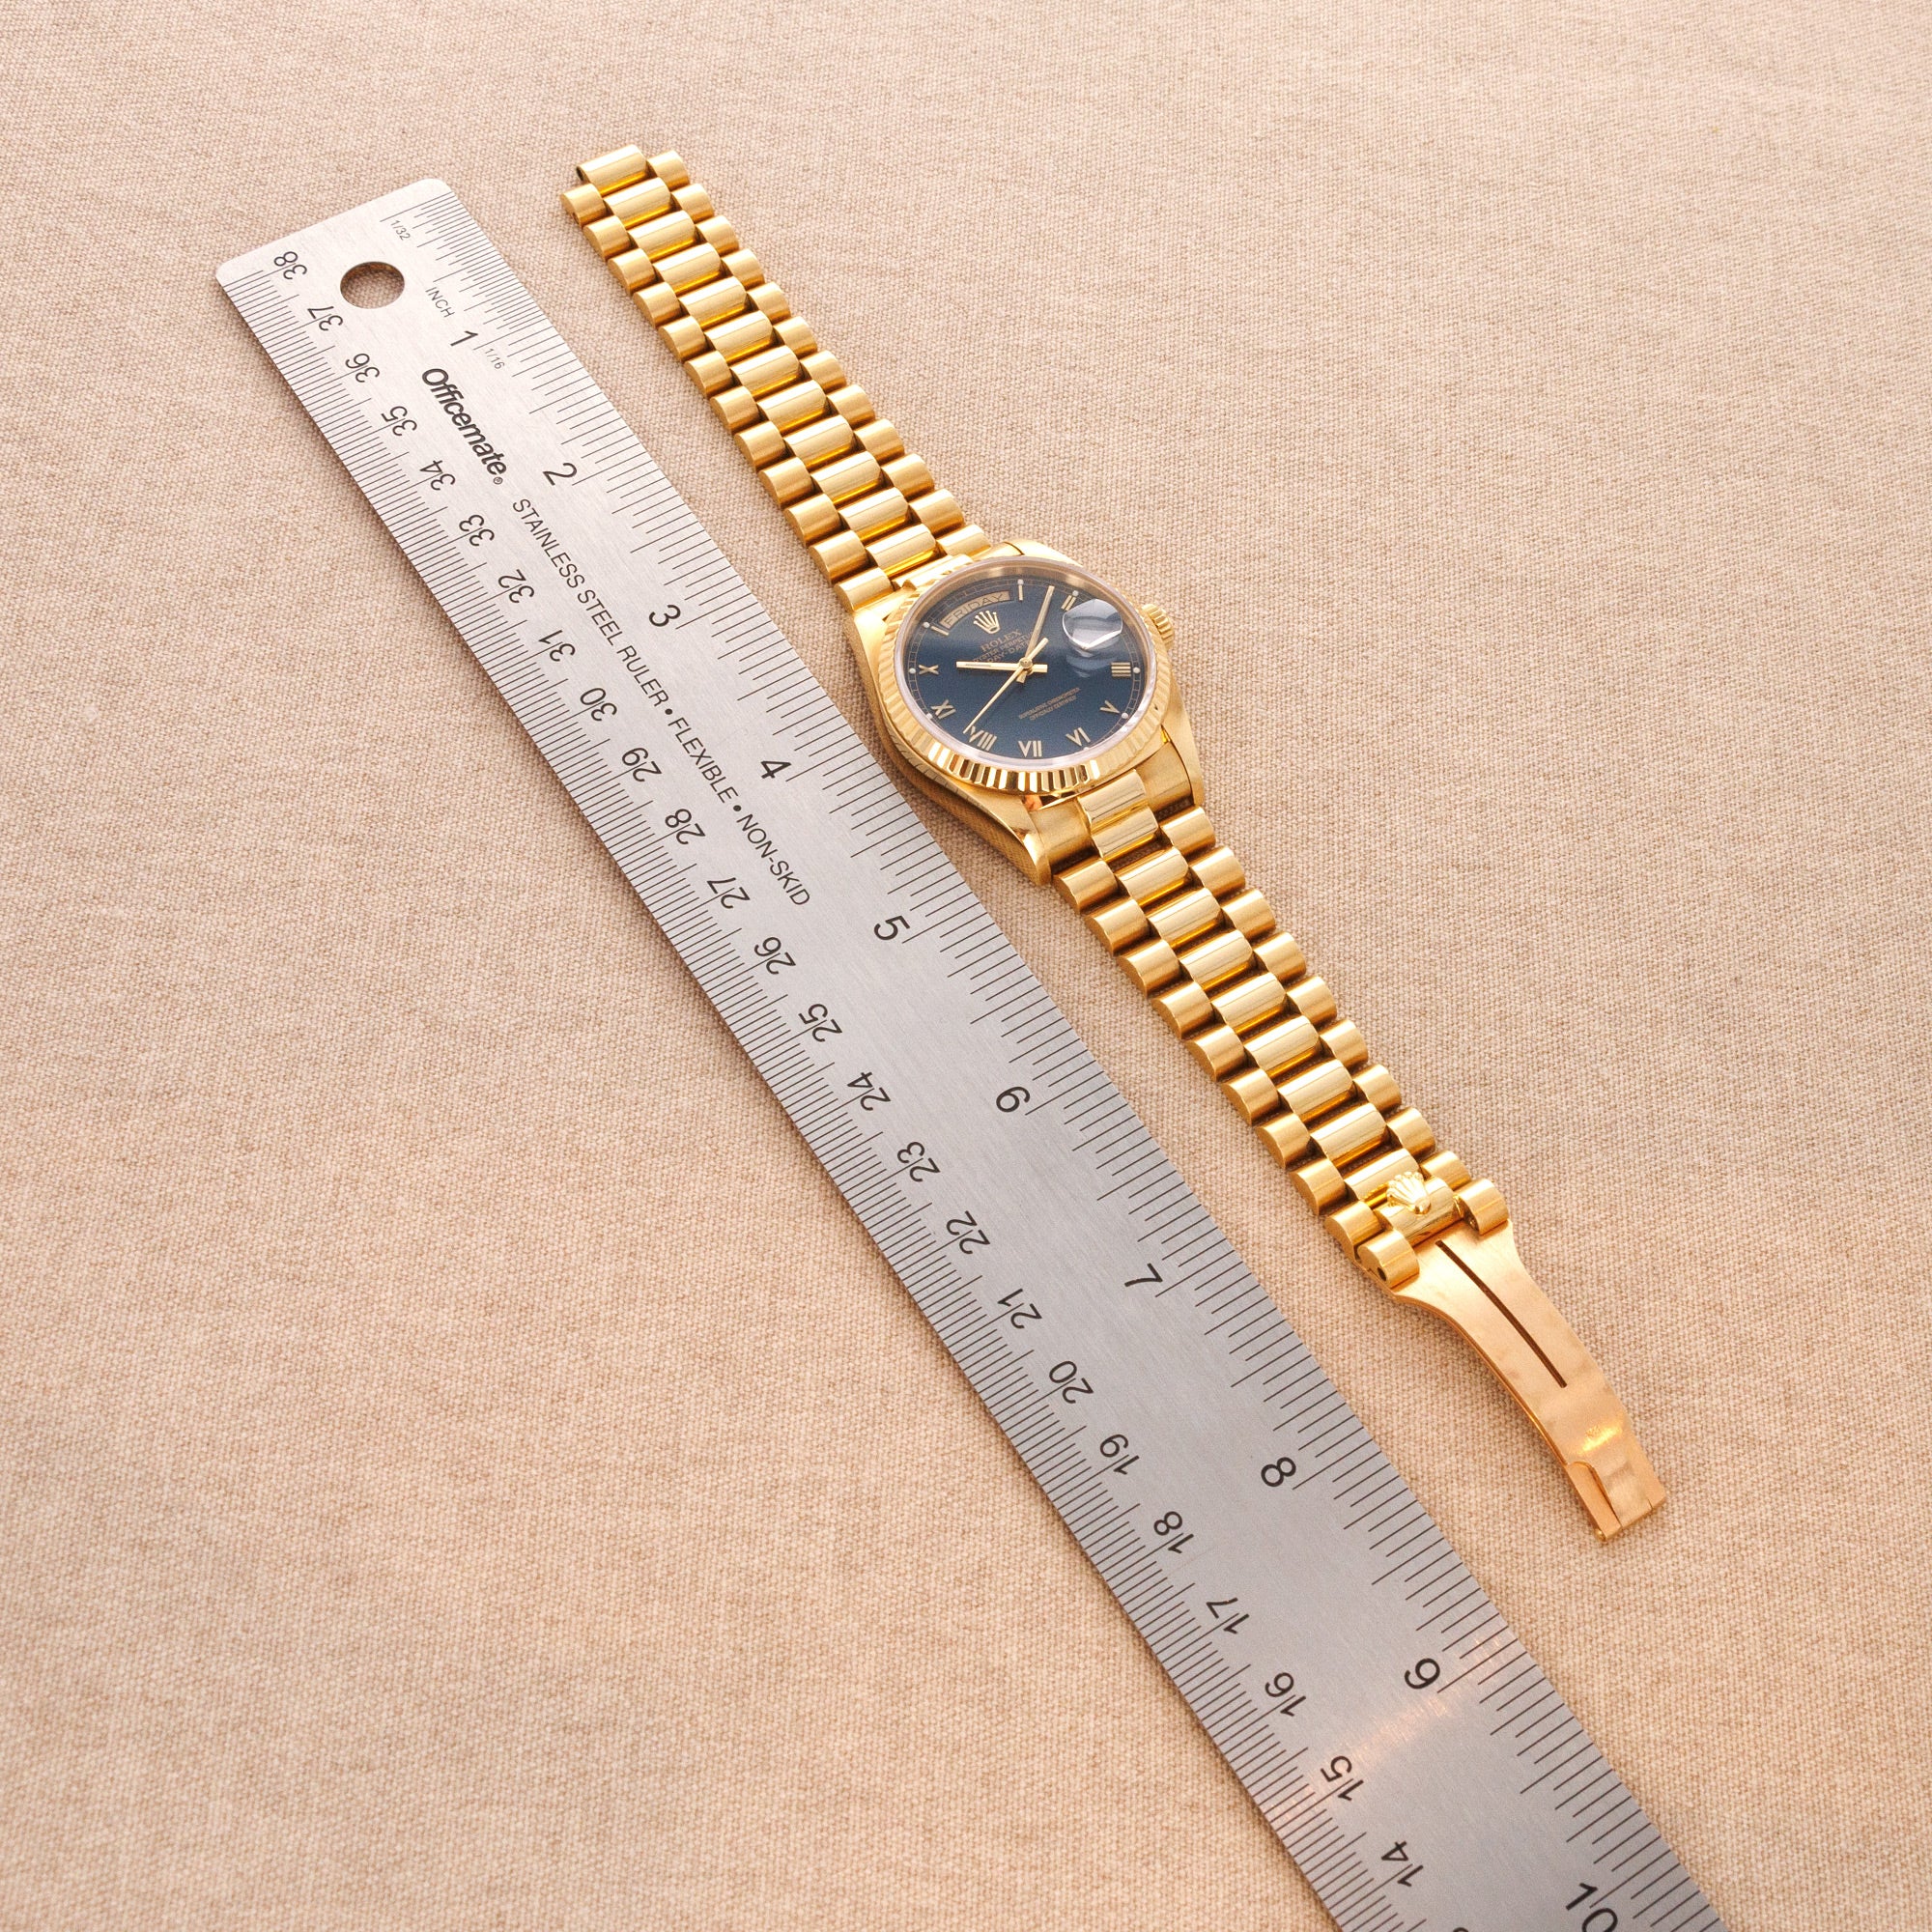 Rolex - Rolex Yellow Gold Day-Date Ref. 18038 with Blue Dial - The Keystone Watches